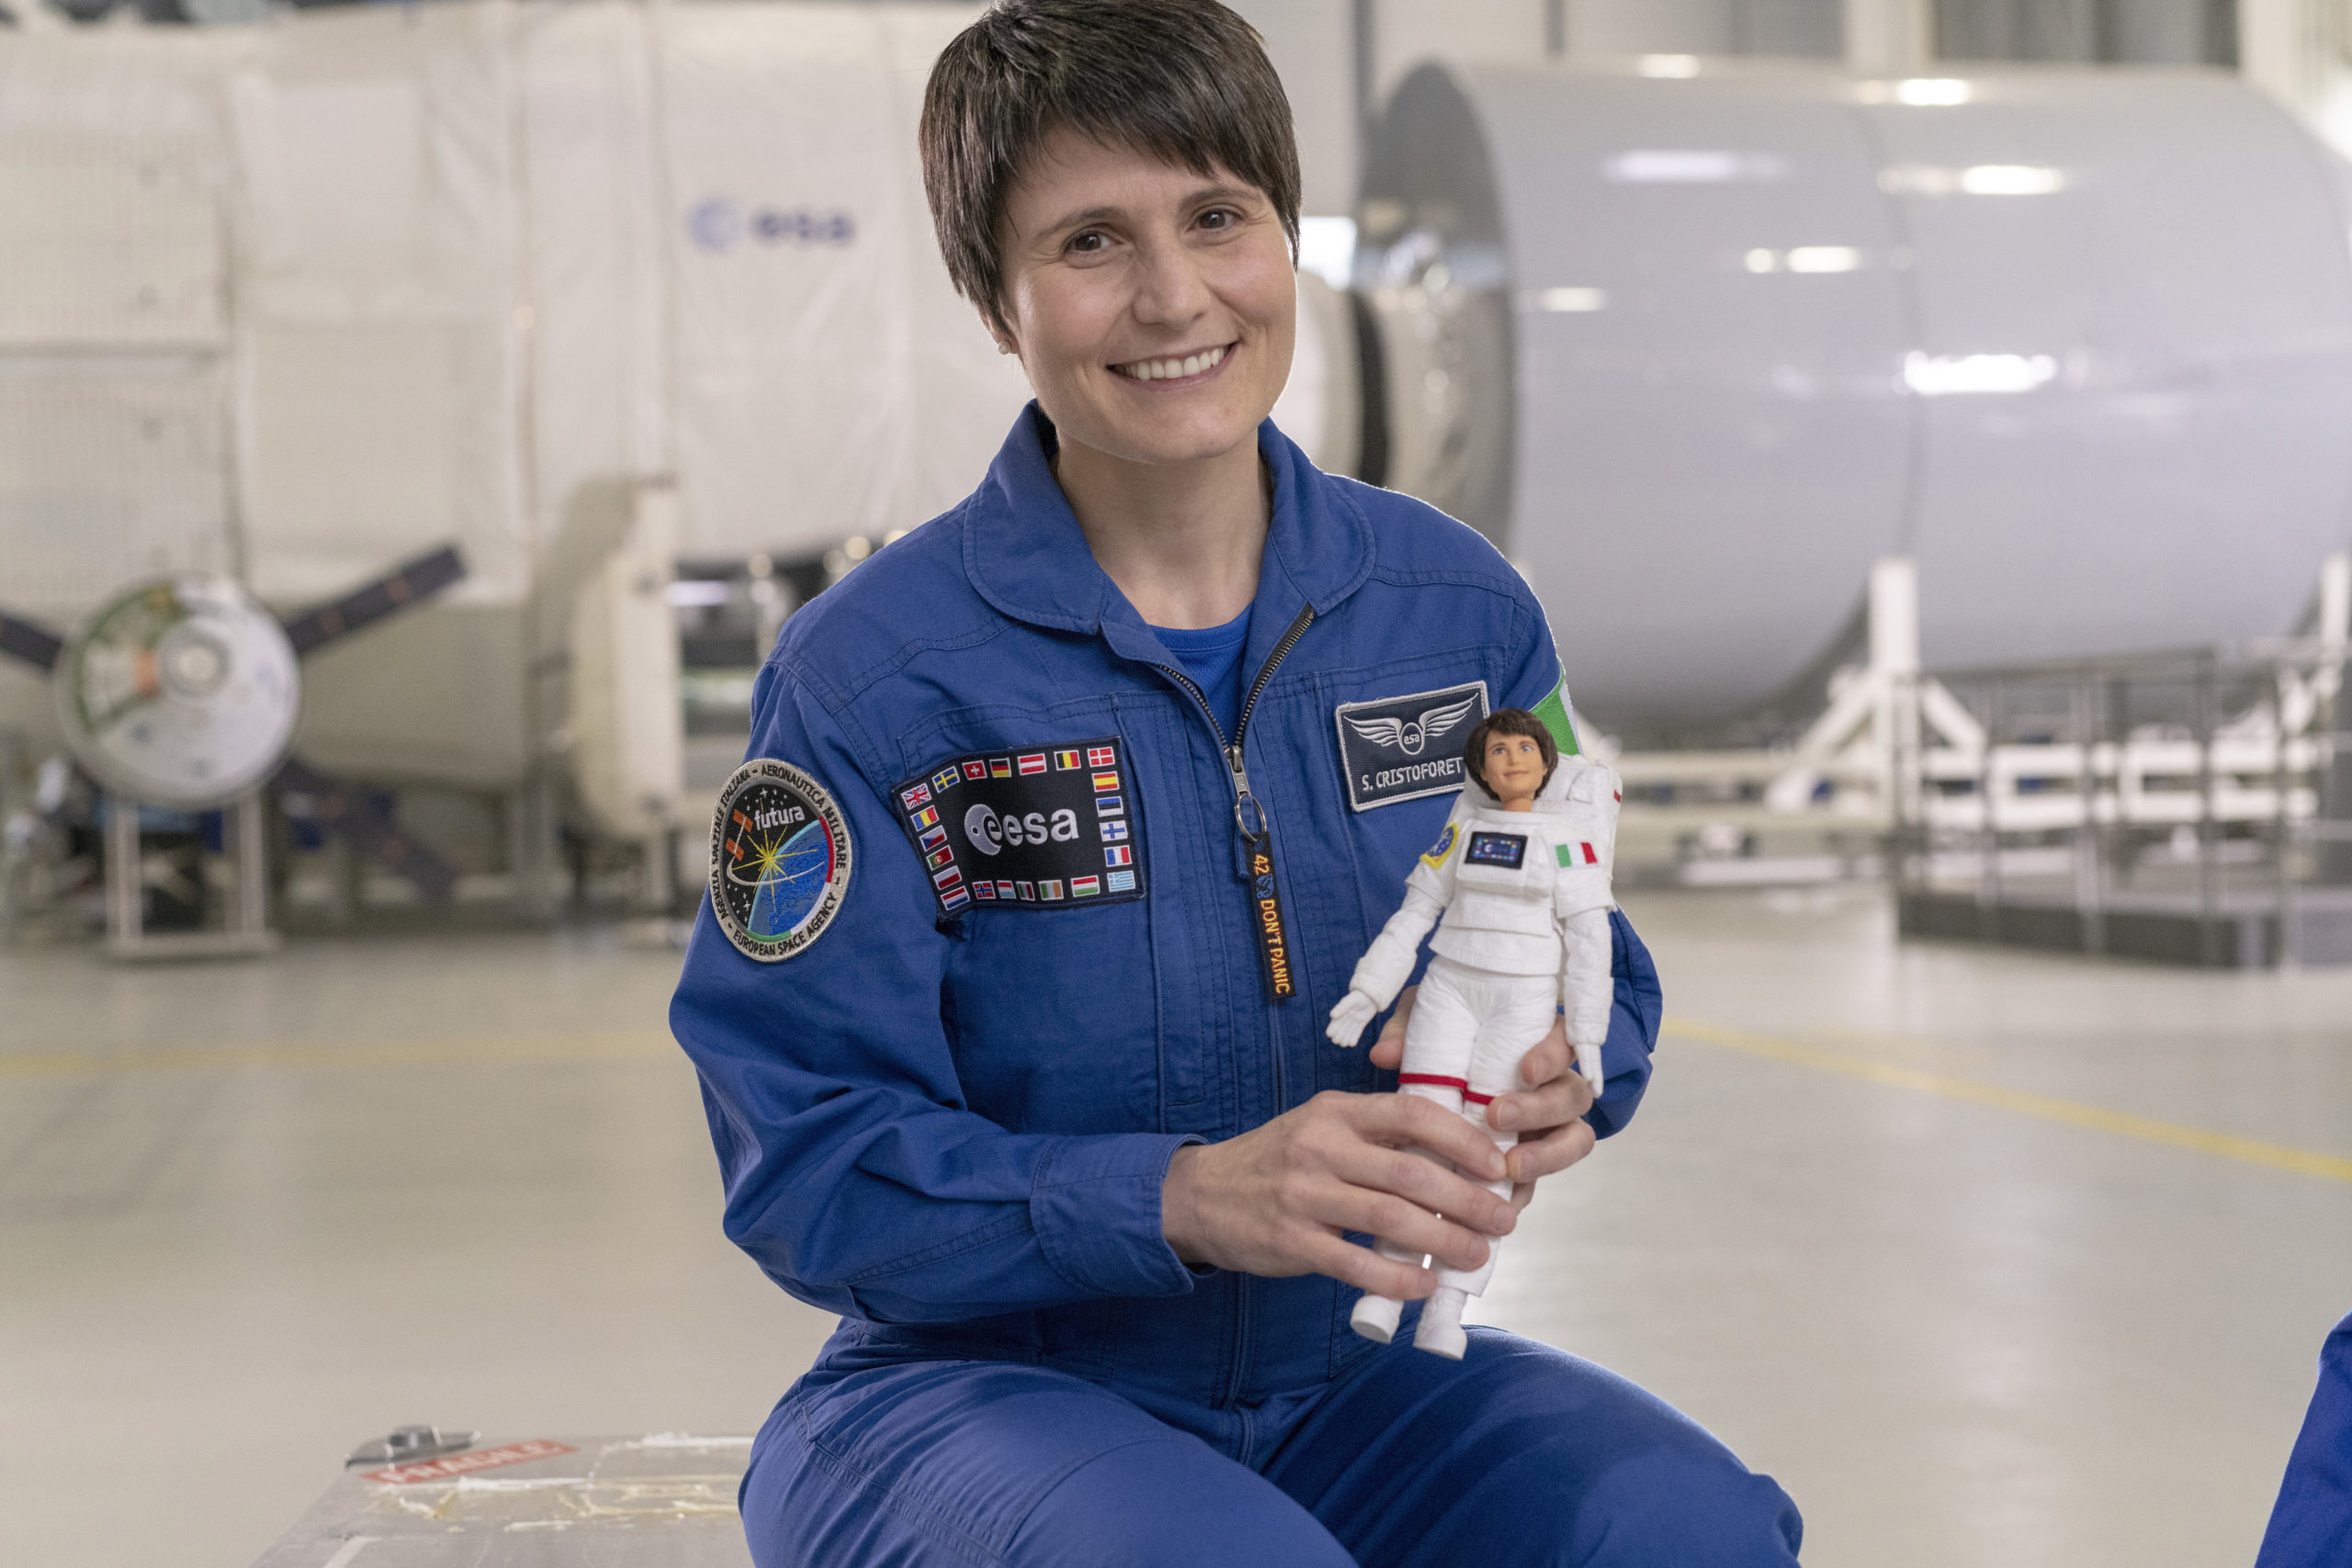 A Carnevale, in costume fra le stelle come Astrosamantha!